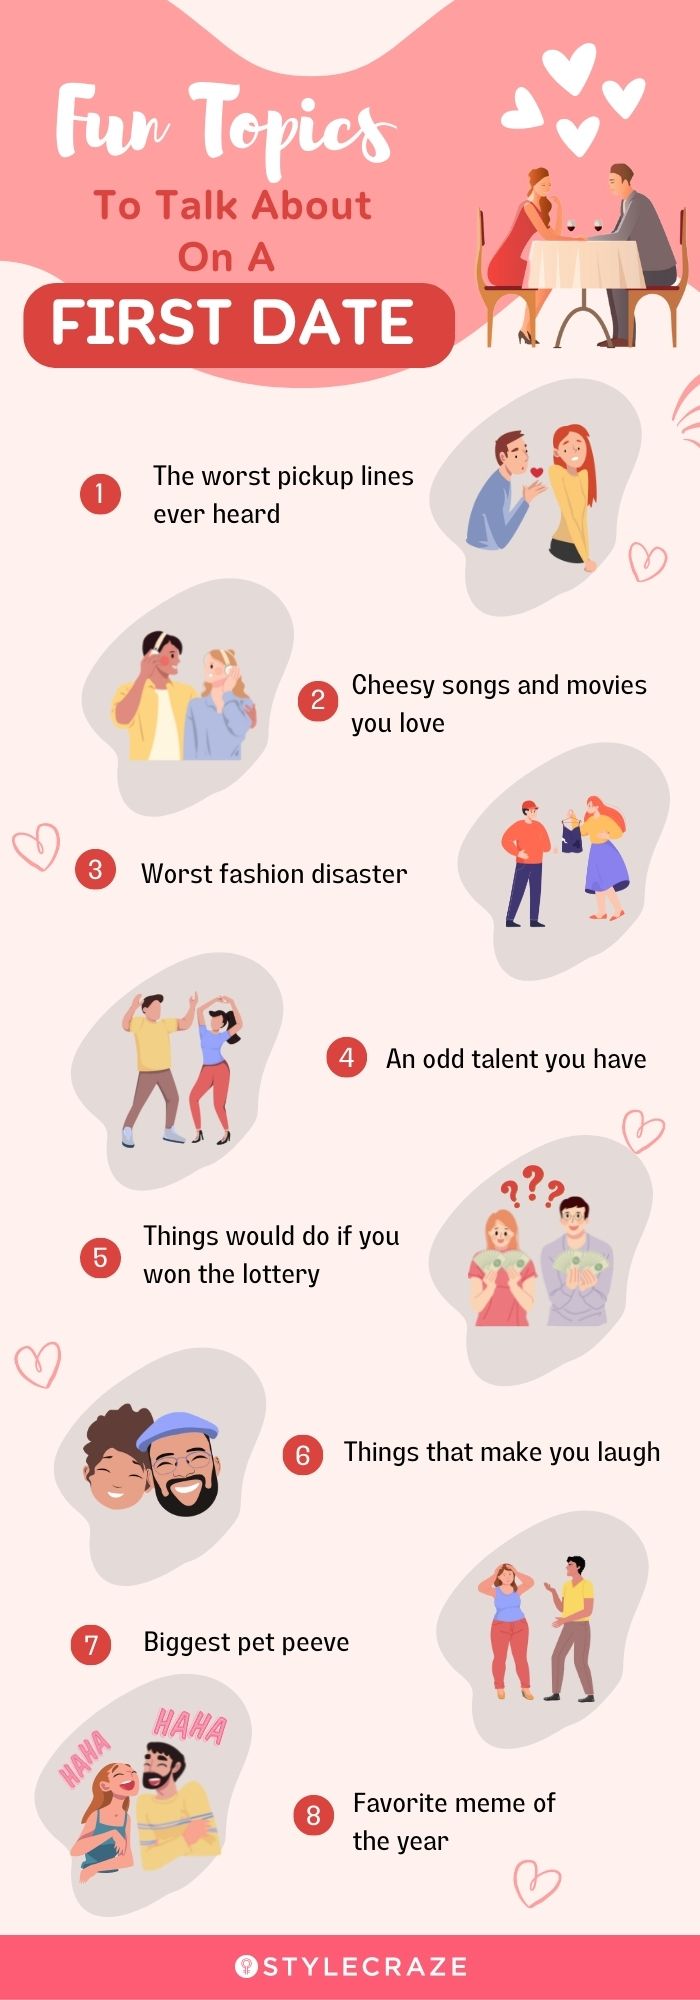 fun topics to talk about on a first date [infographic]